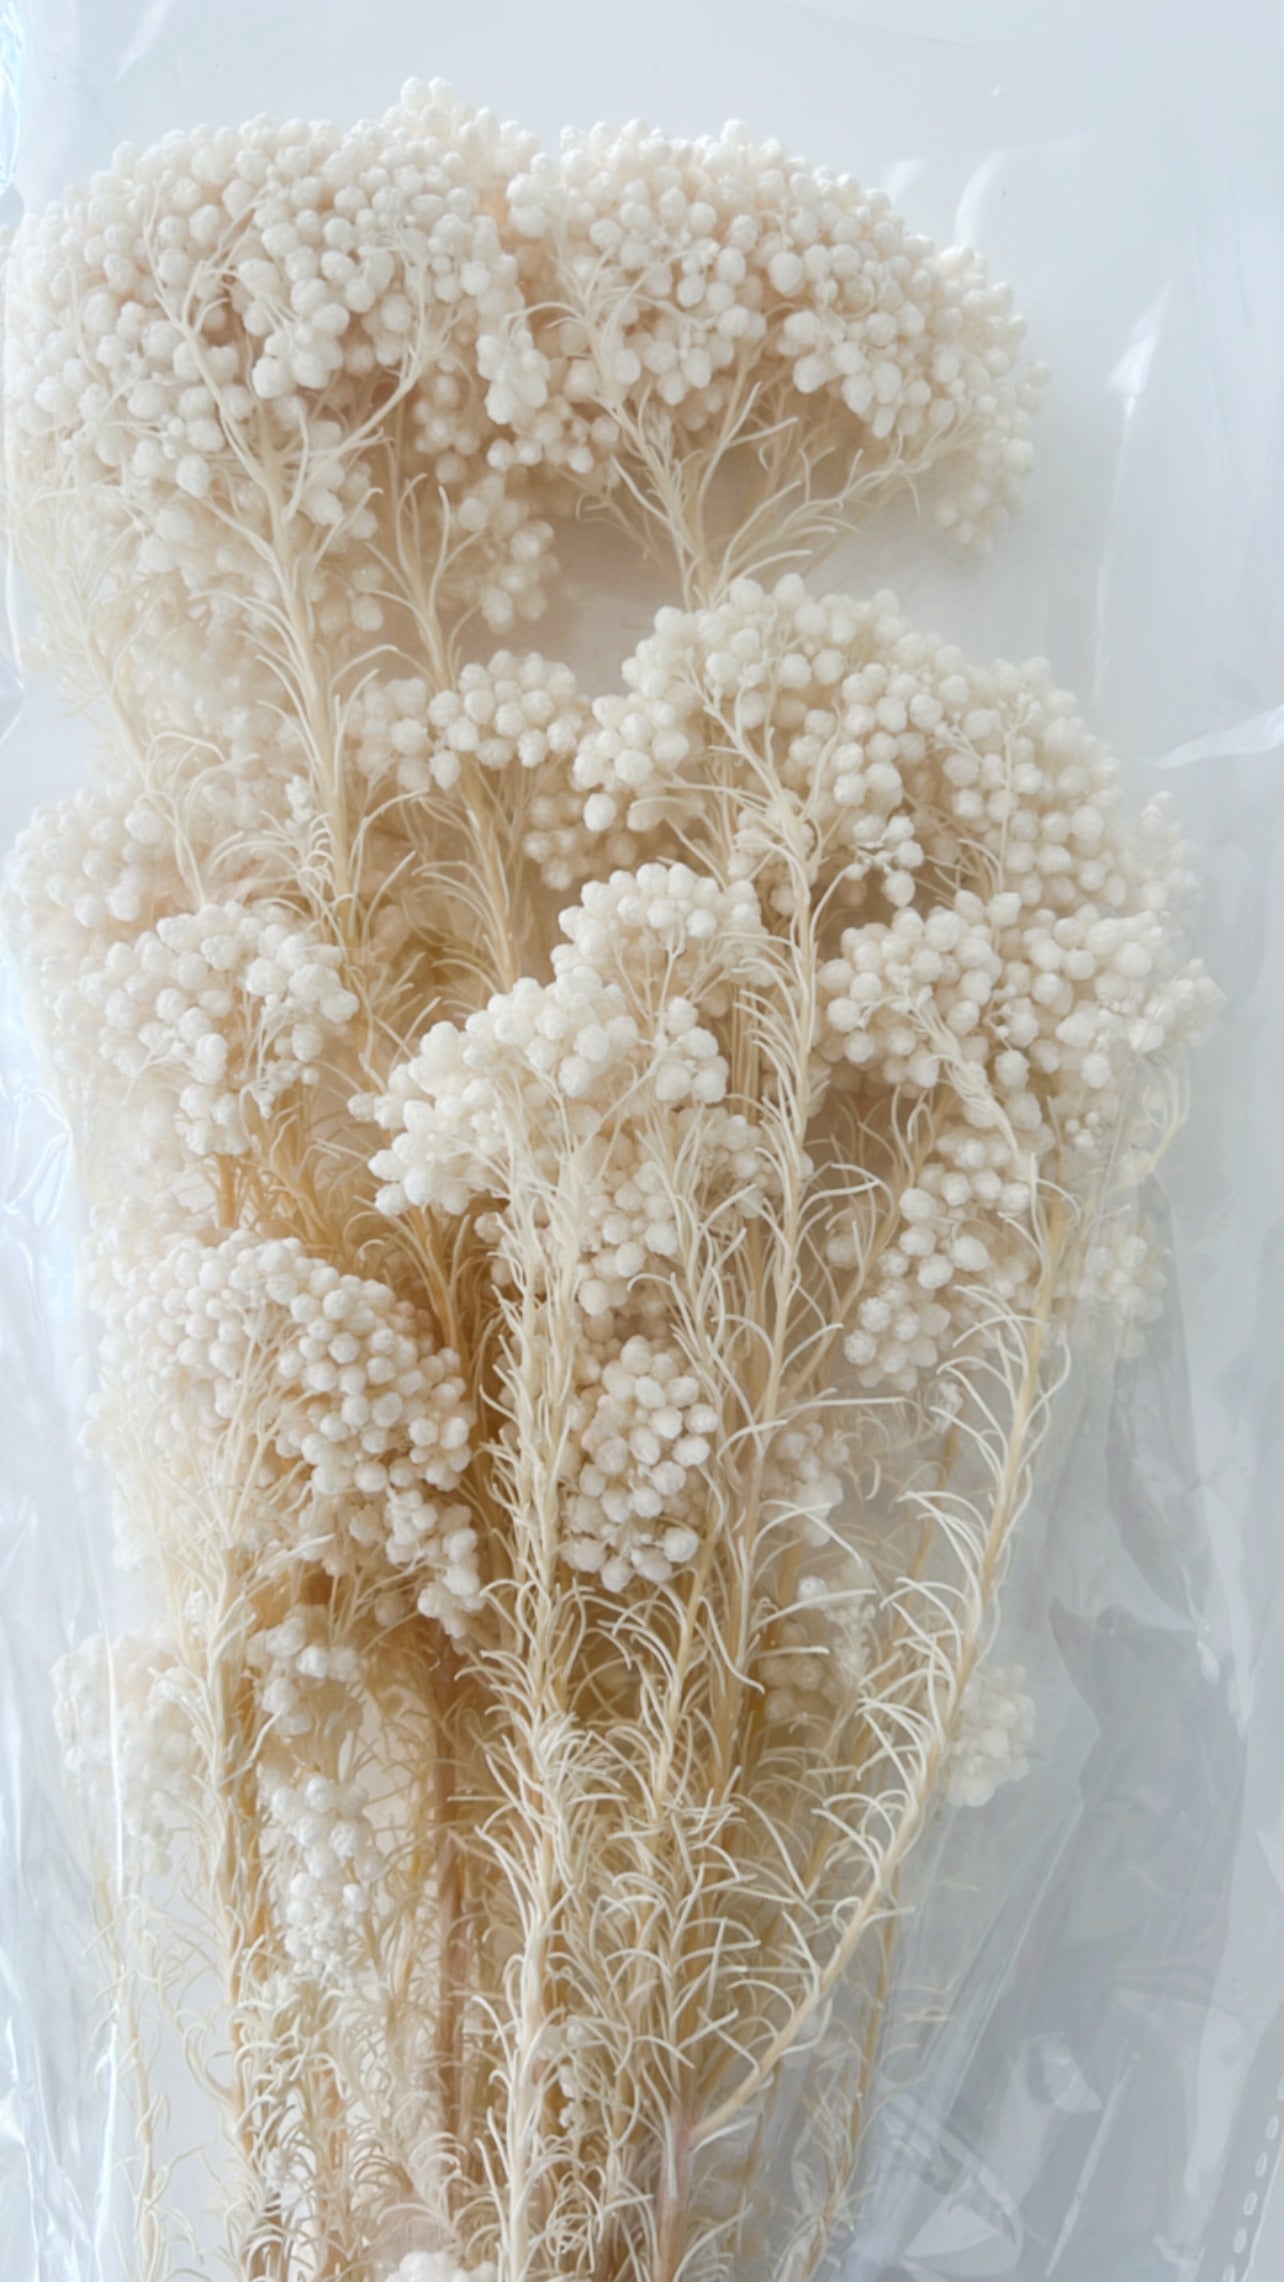 Dried white rice flowers 